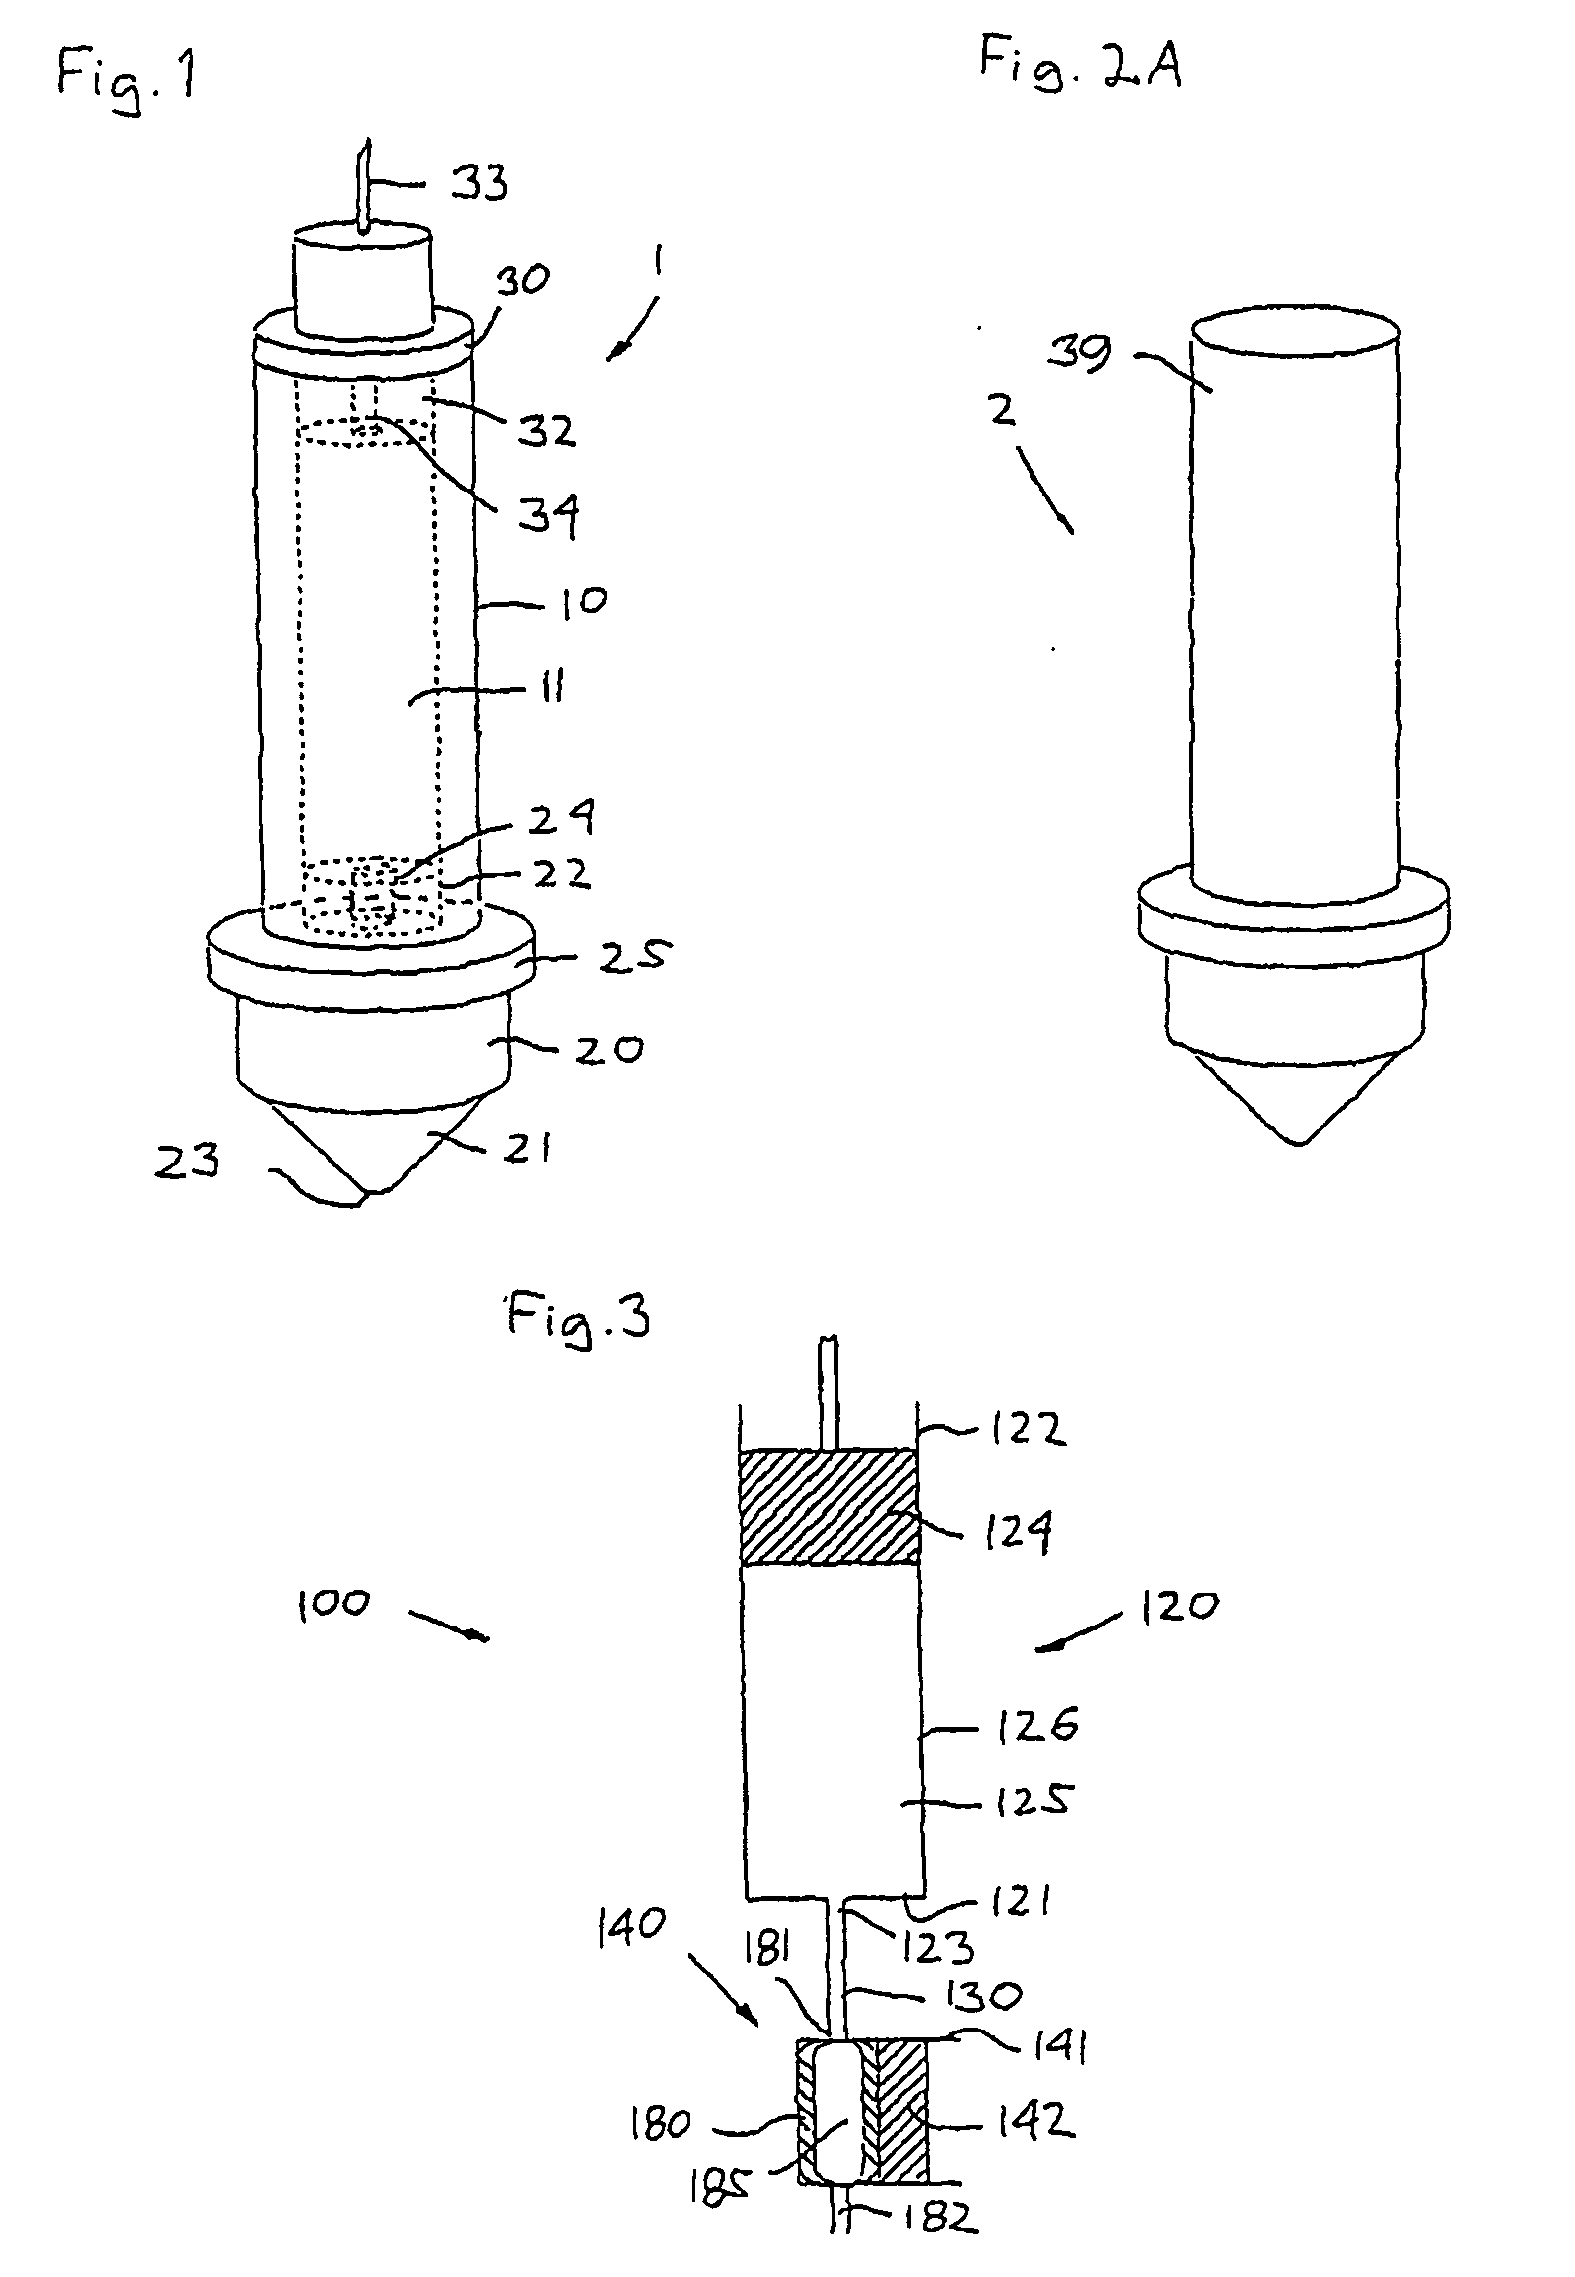 Impulse chamber for jet delivery device